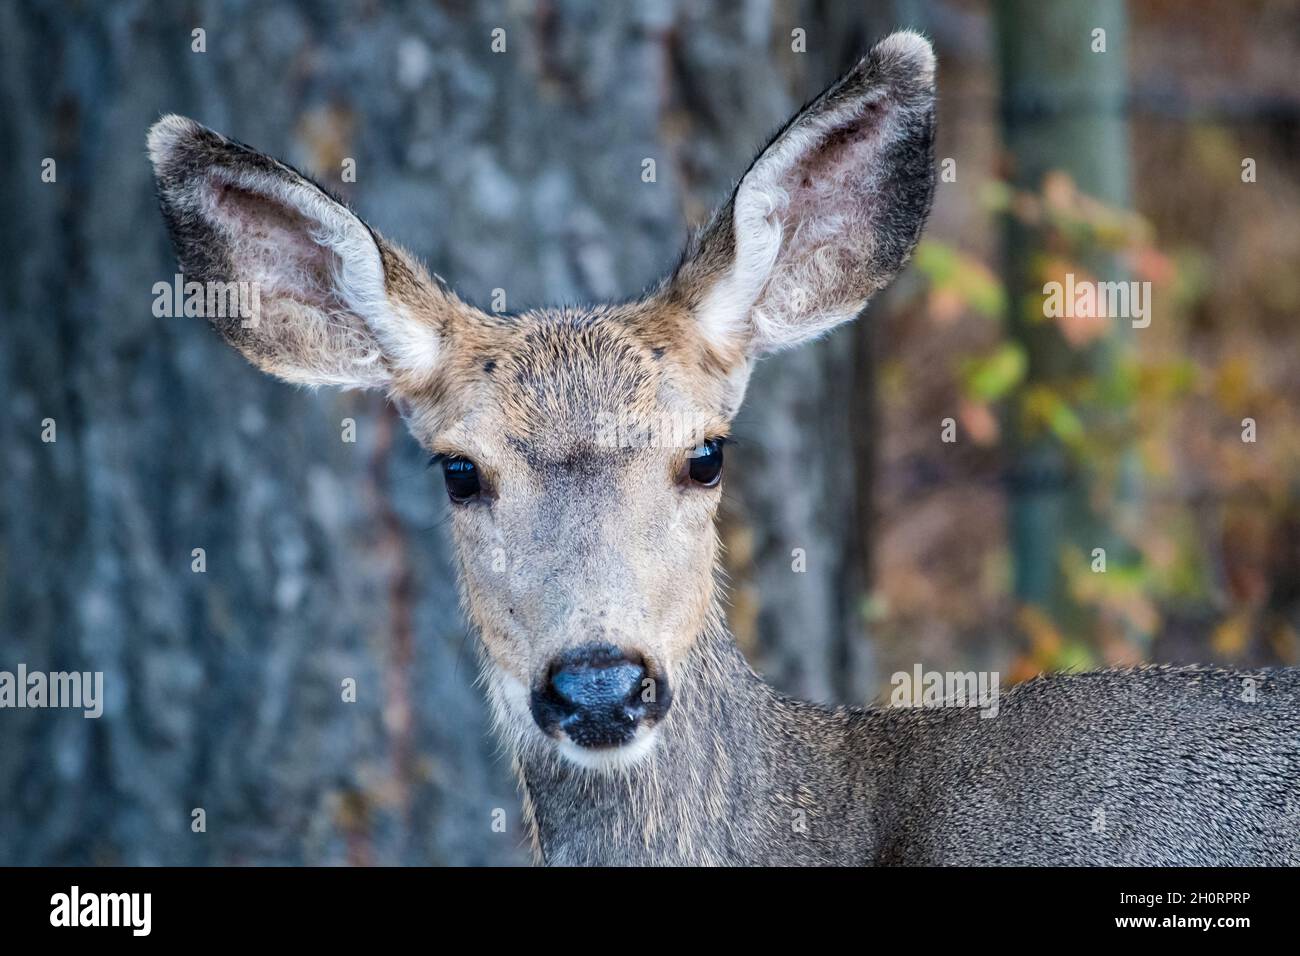 Portrait of a young Deer standing in a forest, Canada Stock Photo